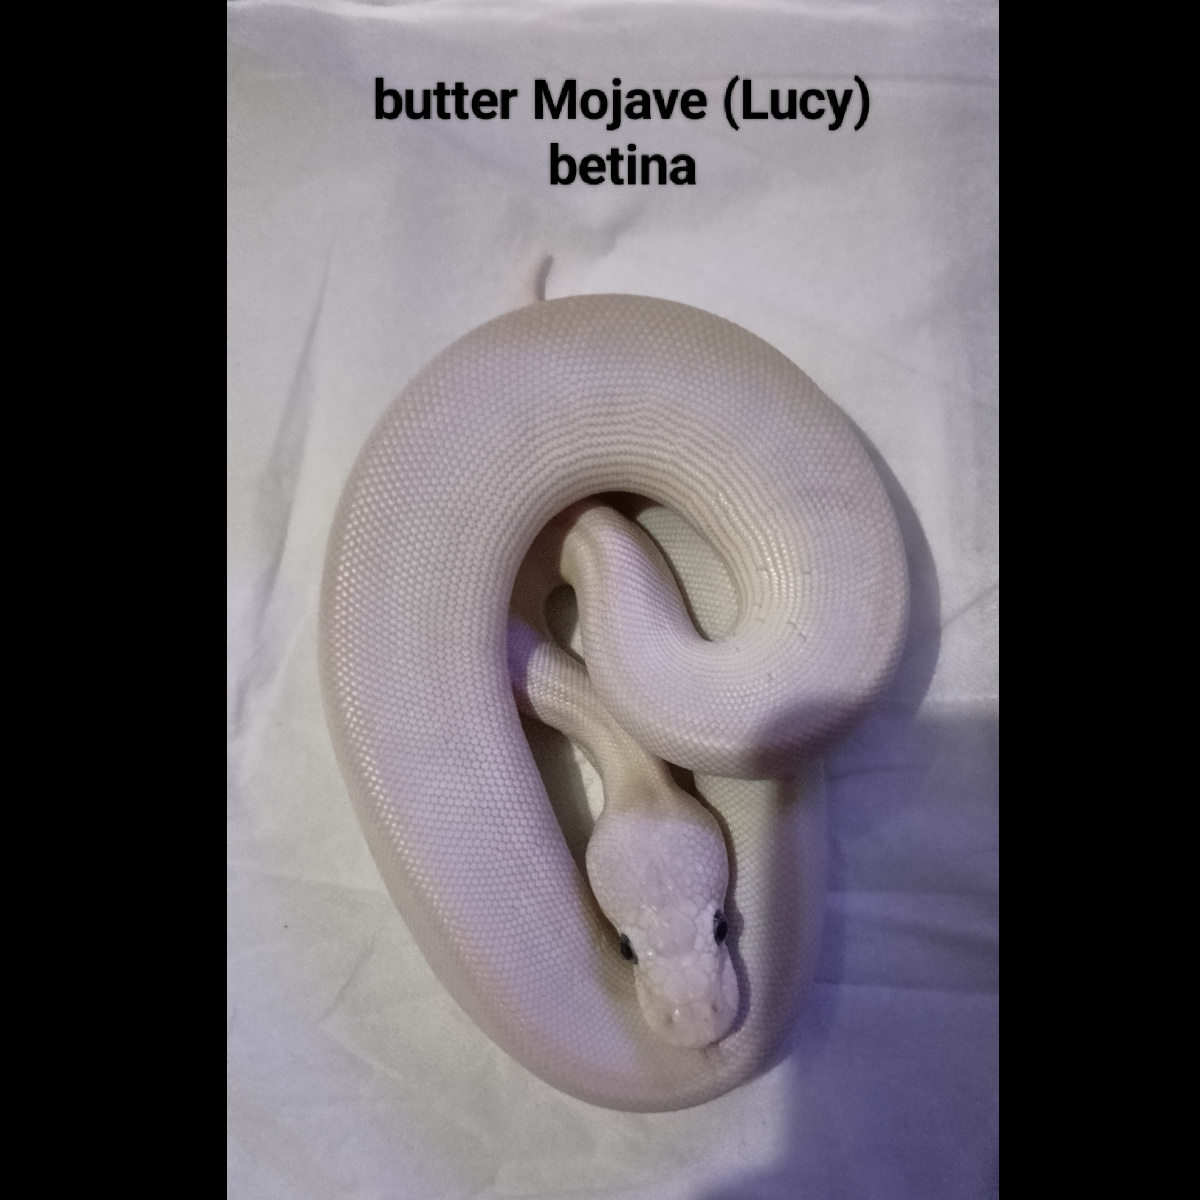 F butter mojave